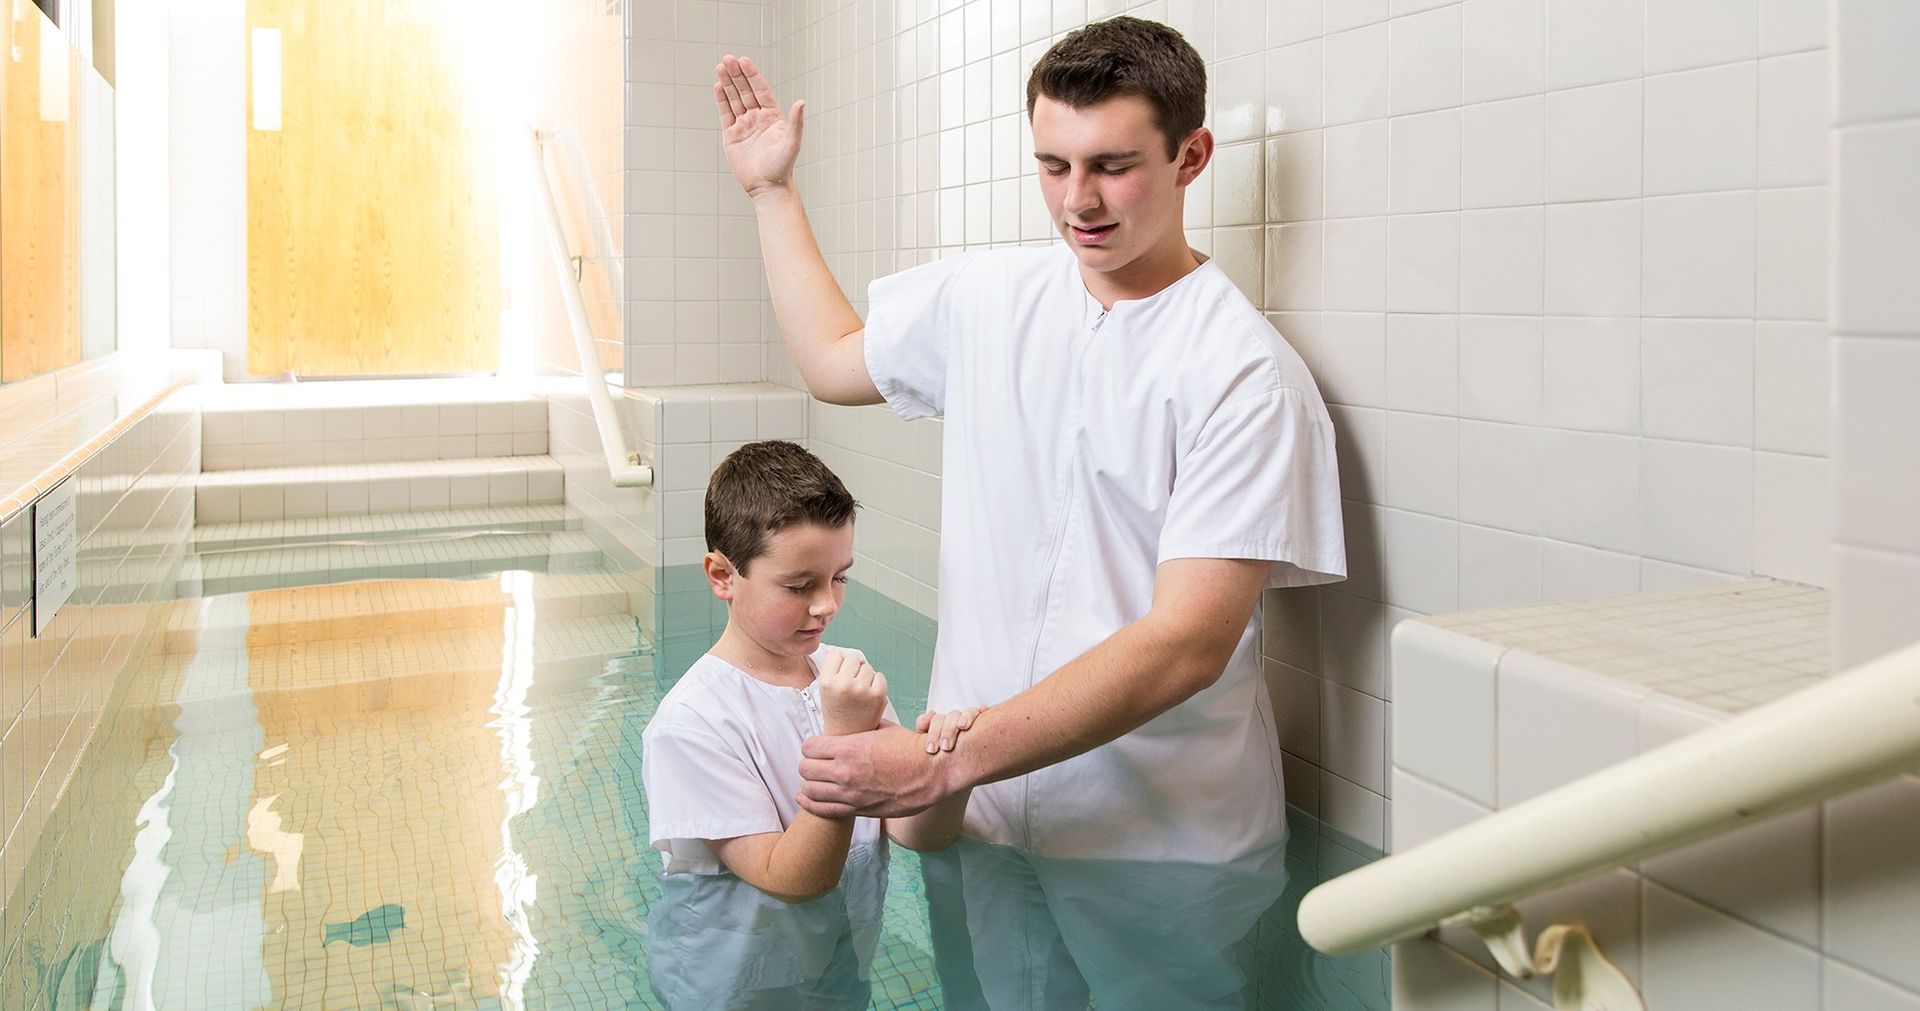 A young man performing the baptism of a boy.